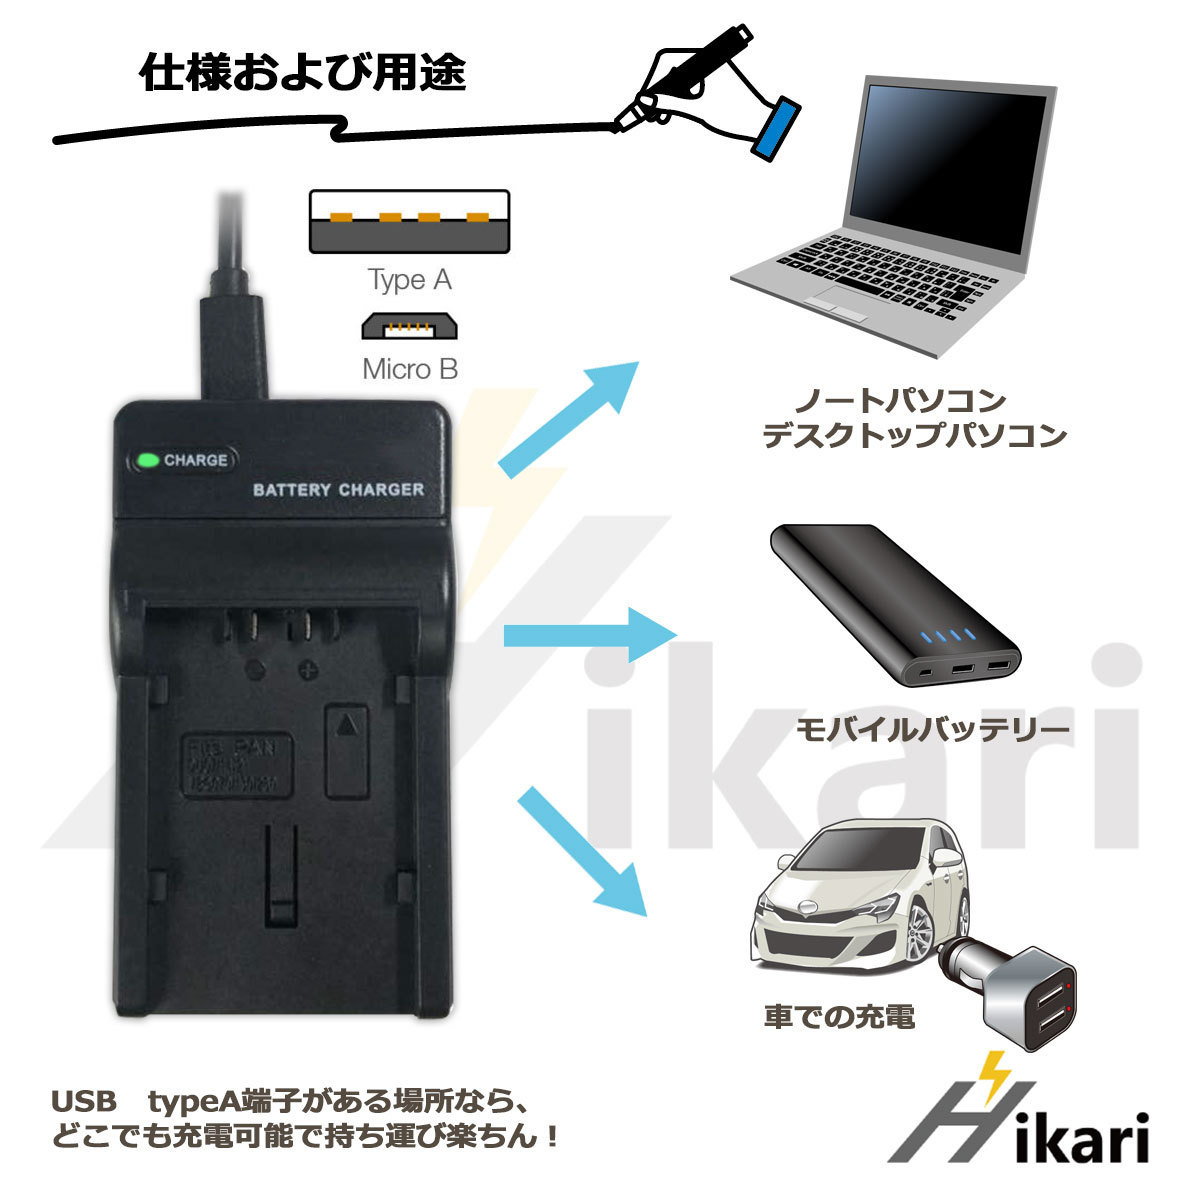 LC-E17 LP-E17 Canon Canon interchangeable USB charger original battery . charge possibility EOS RP EOS M3 EOS M5 EOS M6 EOS 77D EOS 200D EOS 750D eos 